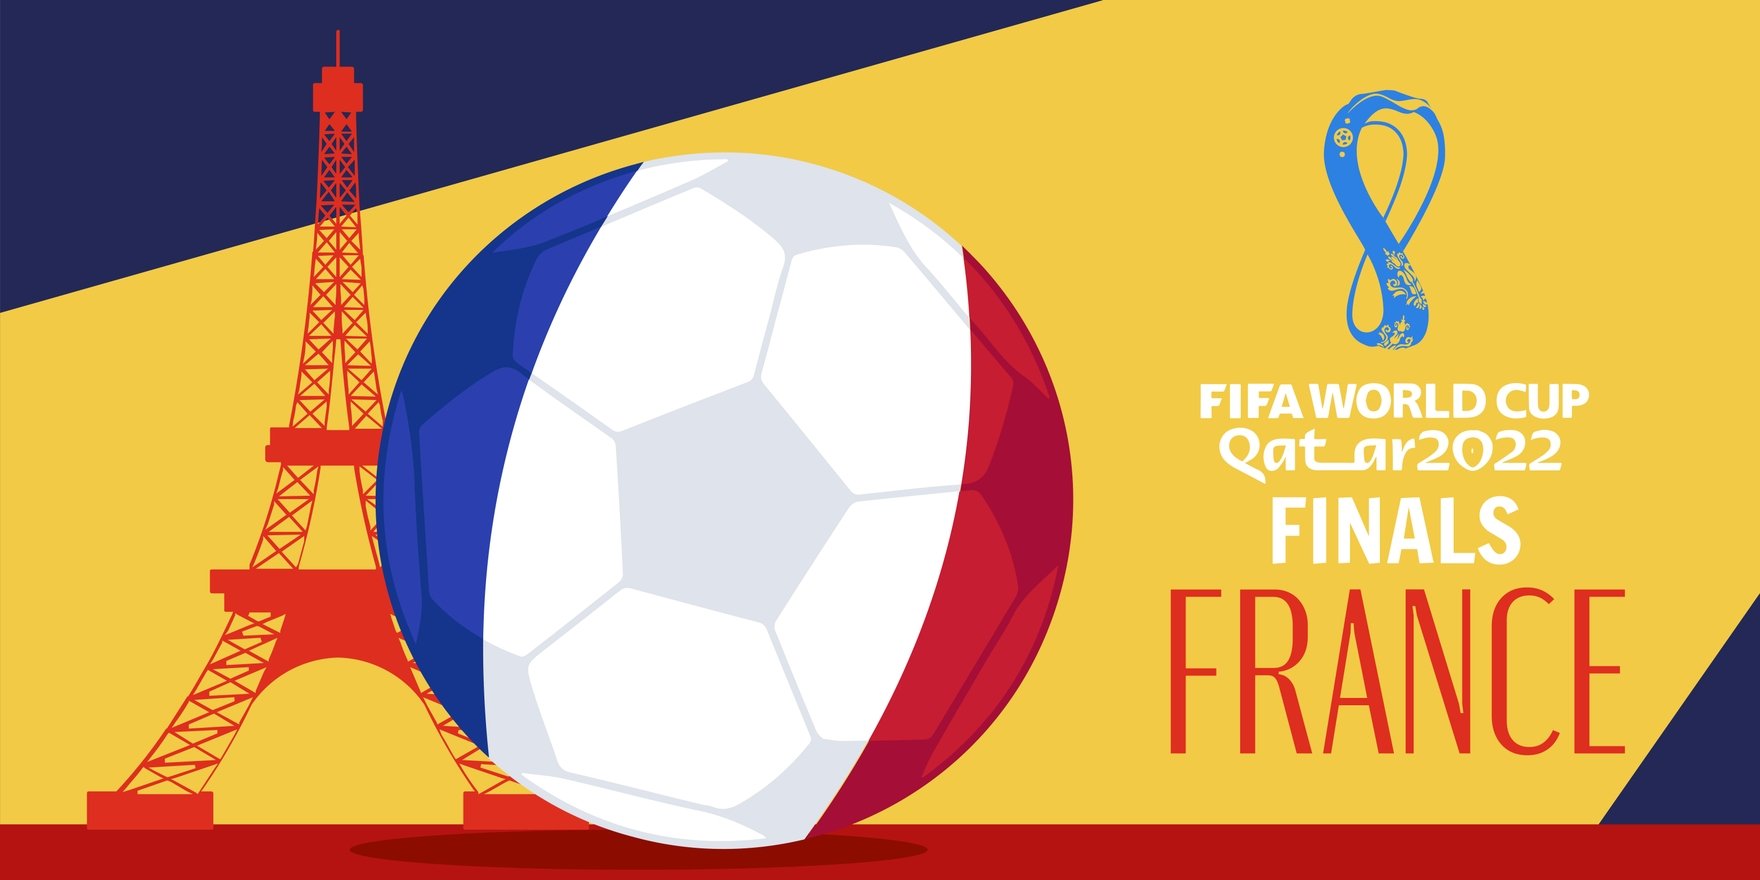 FIFA World Cup 2022 France Finals Banner in Illustrator, PSD, JPG, PNG